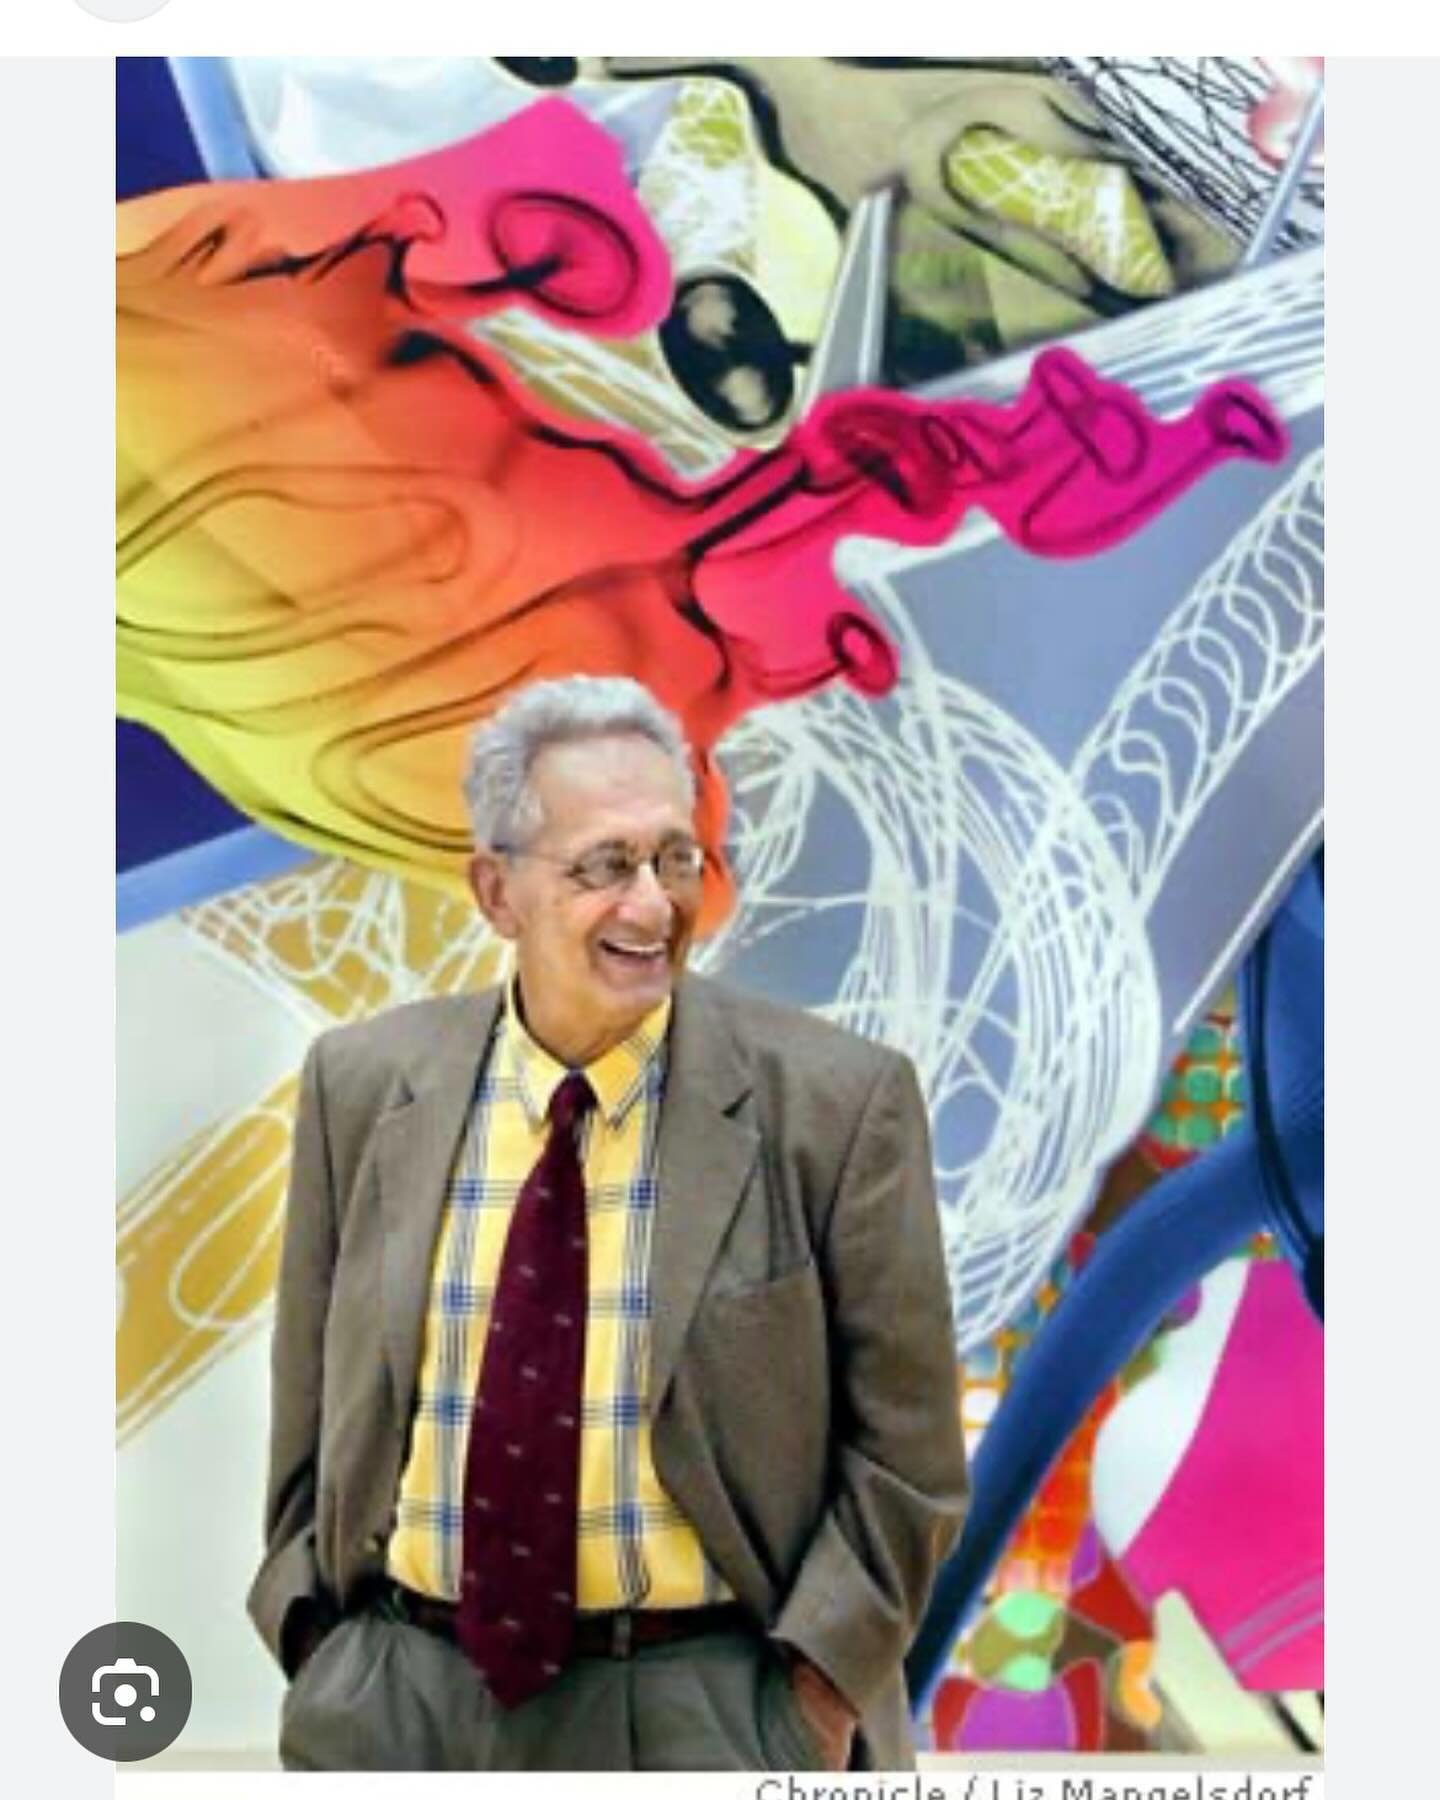 RIP Frank Stella. Your art amazes. 
I still remember your graciousness when I called you at home with a request and you said YES! And to later sit with you and David Hockney was a true art experience.